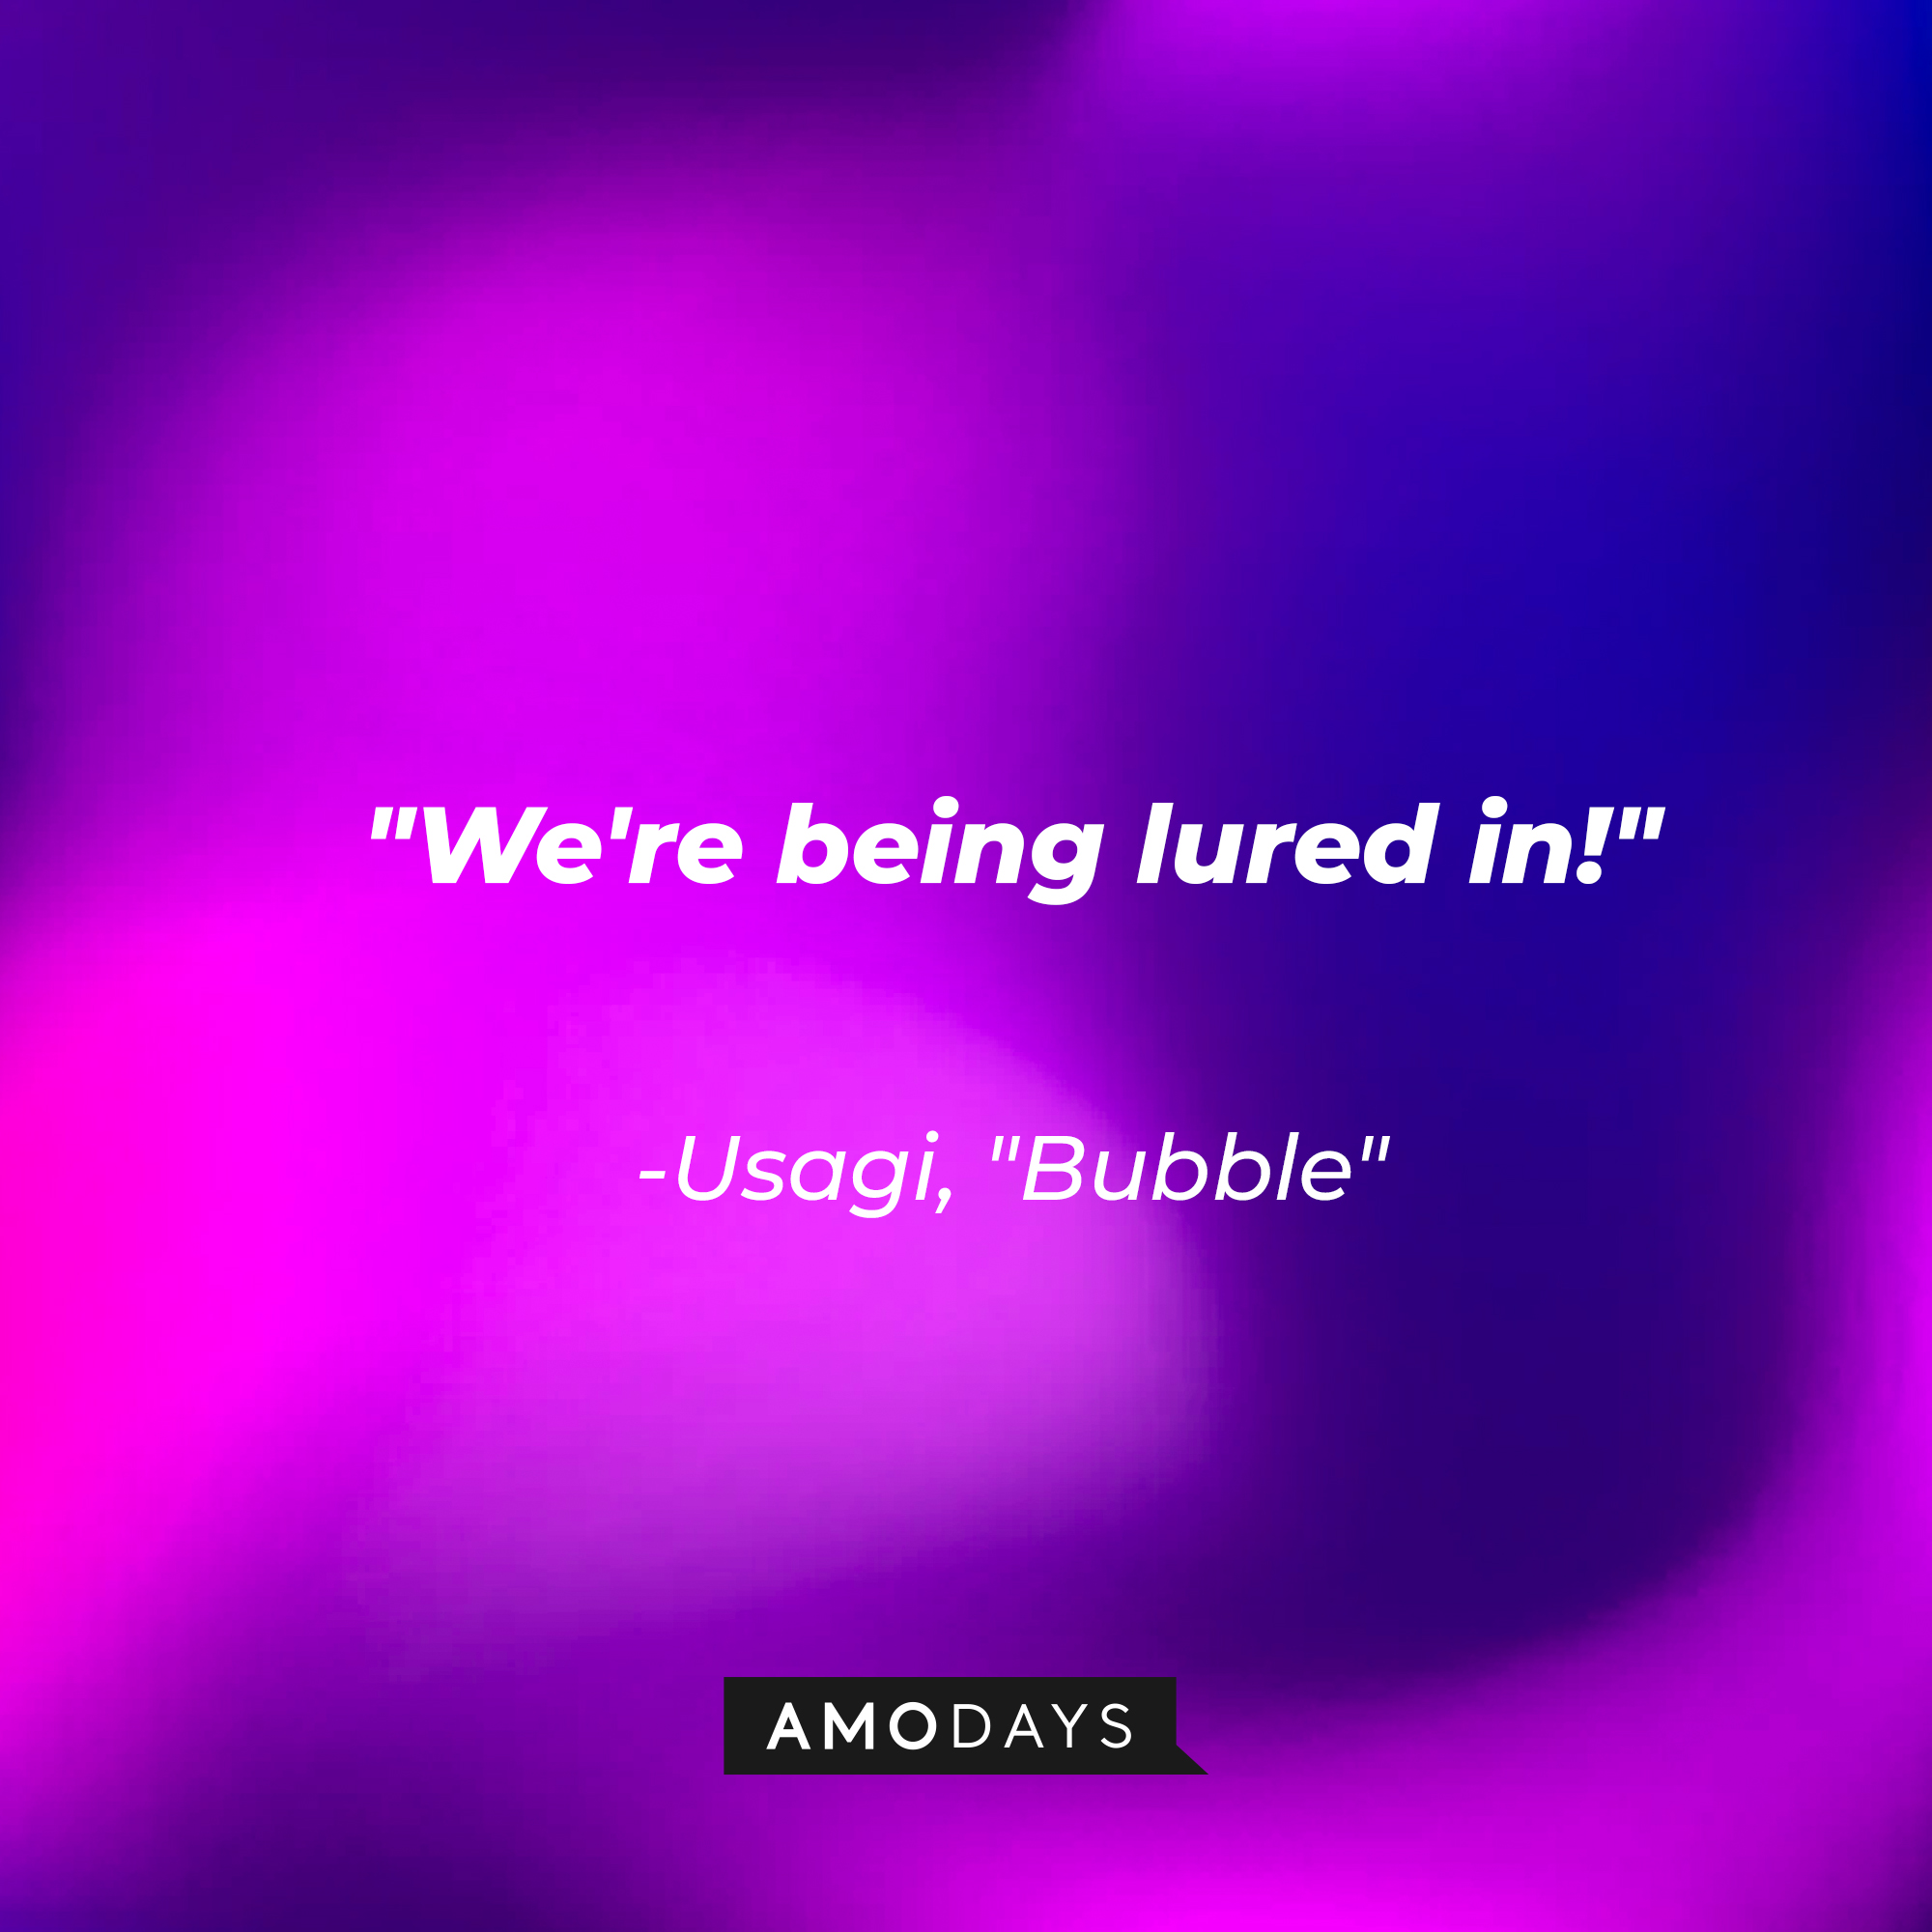 Kai's quote on "Bubble:" "We're being lured in!" | Source: AmoDays